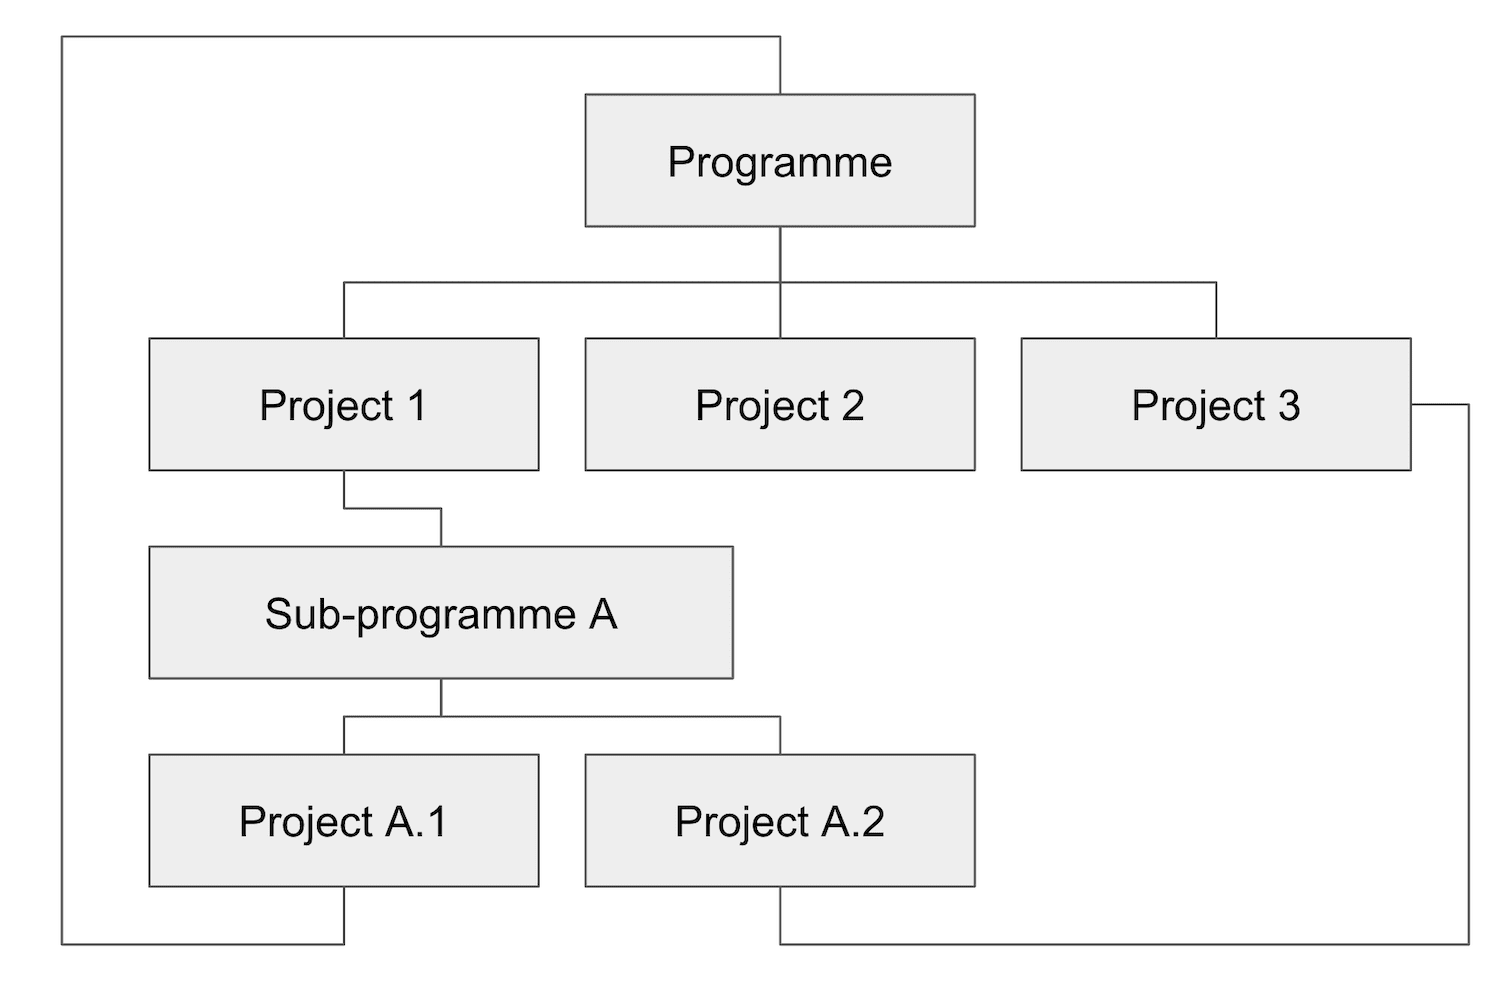 Chart of programmes and projects